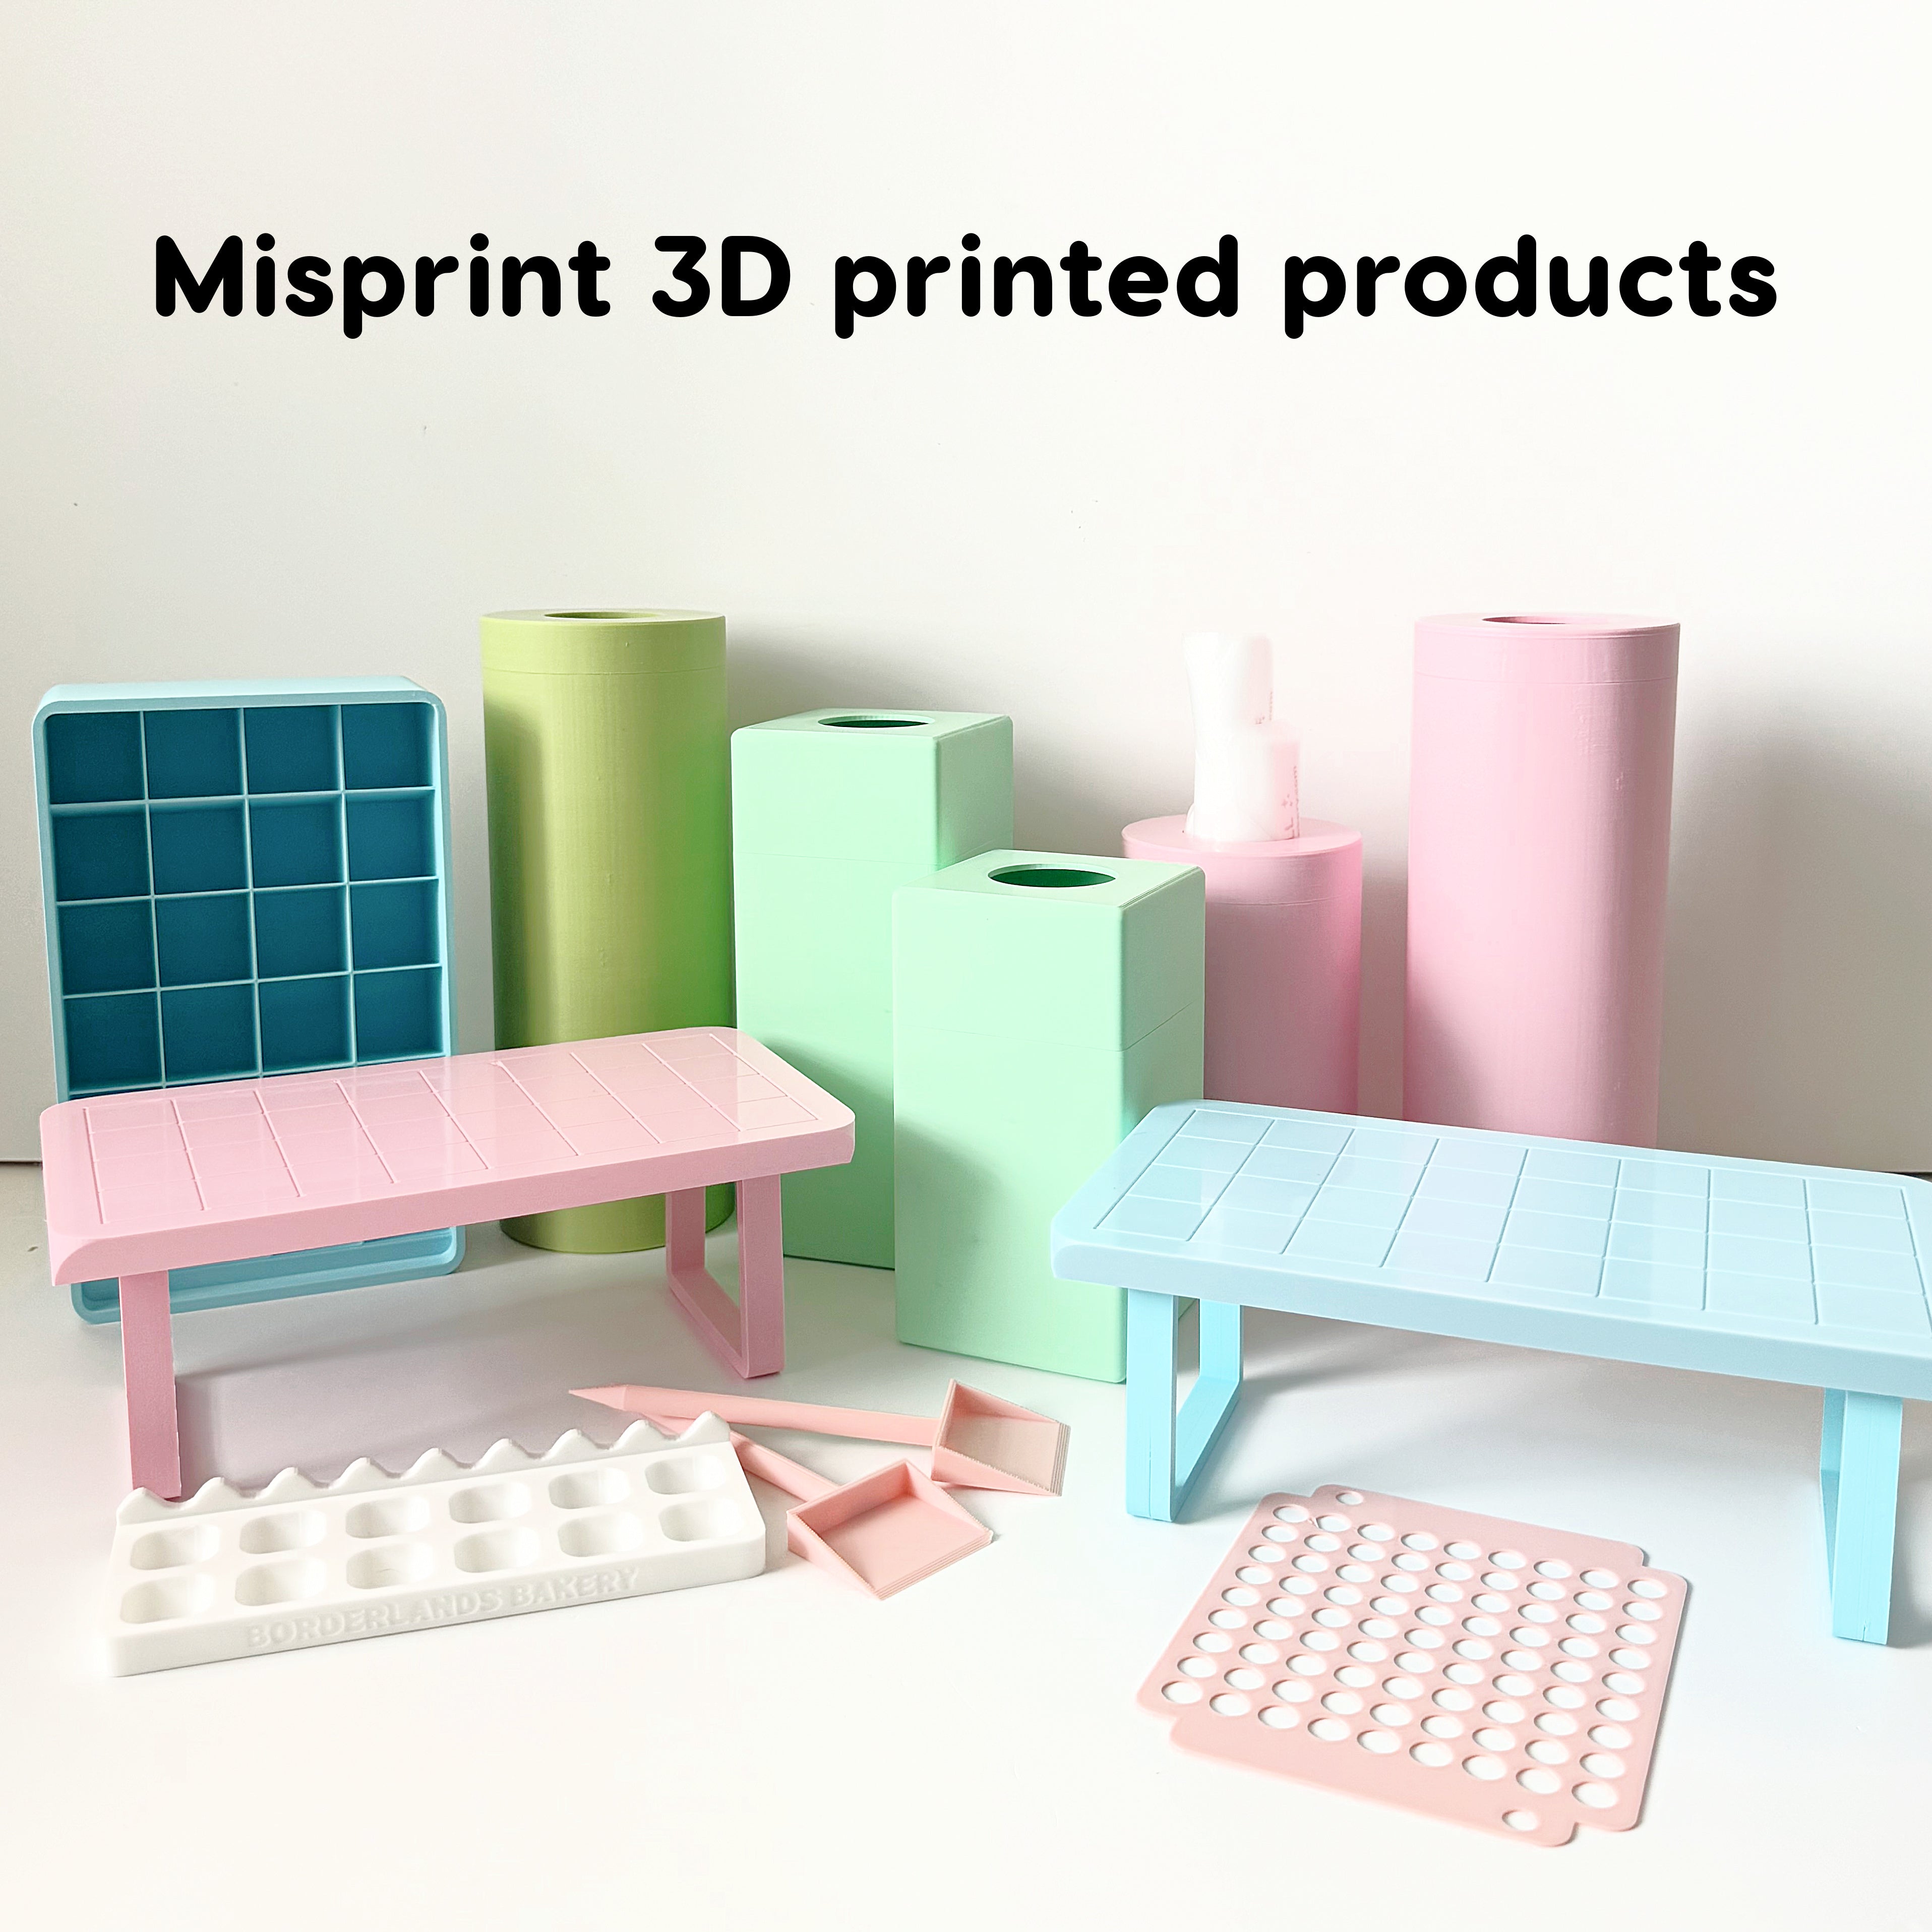 MISPRINT 3D Printed Products